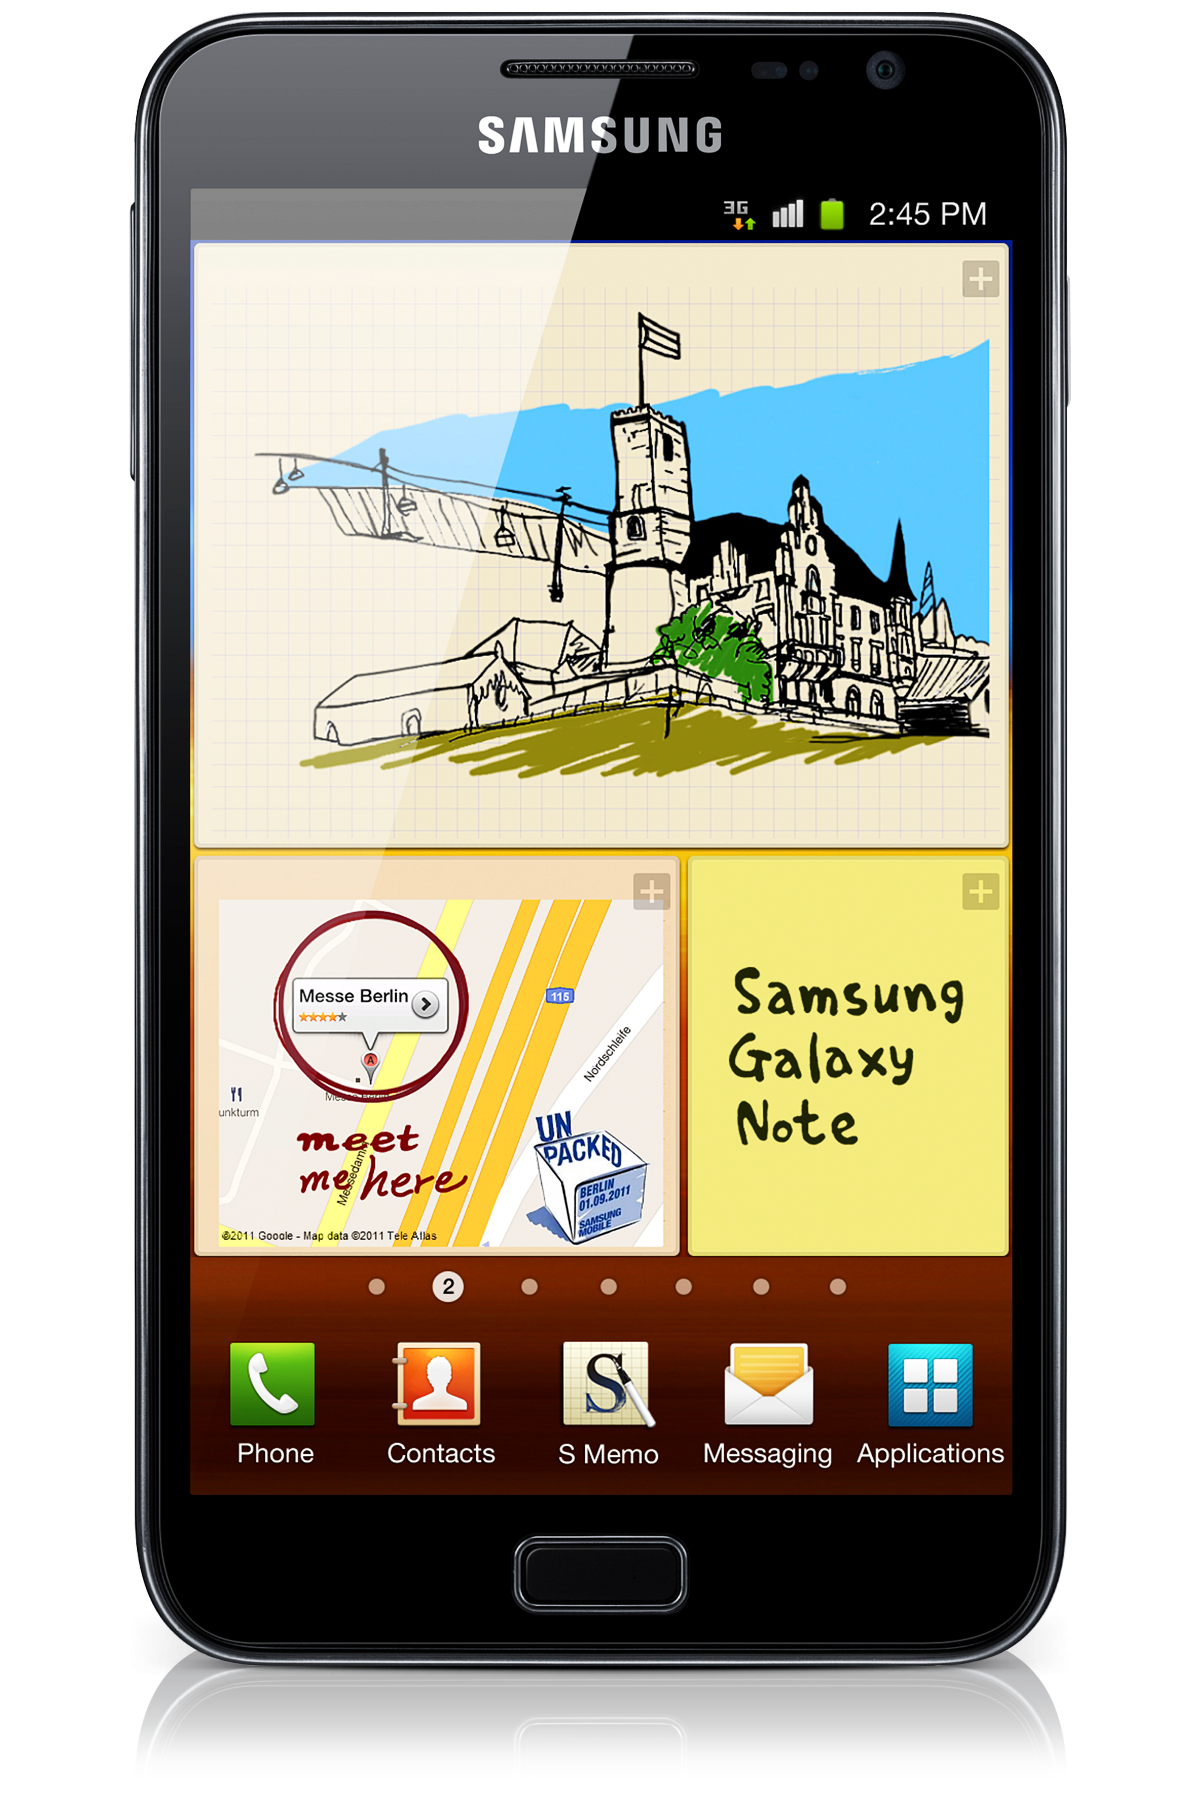 Galaxy Note
N7000 Android